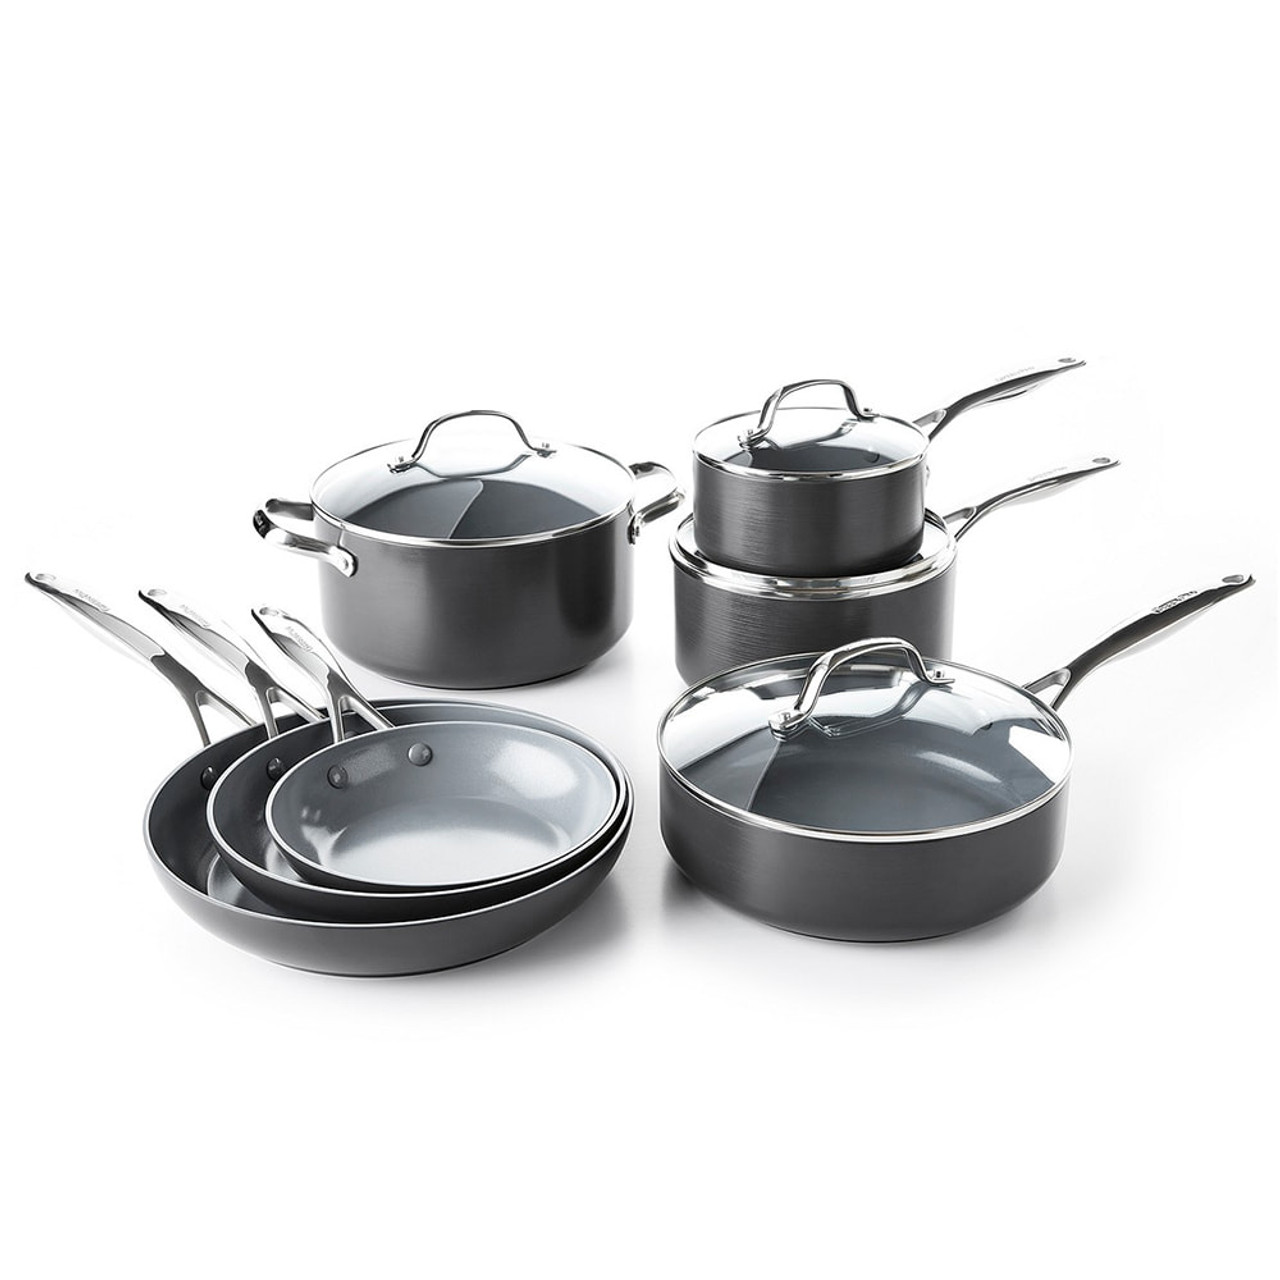 https://cdn11.bigcommerce.com/s-hccytny0od/images/stencil/1280x1280/products/2914/10312/greenpan-valencia-pro-11pc-cookware-set__93555.1594155829.jpg?c=2?imbypass=on